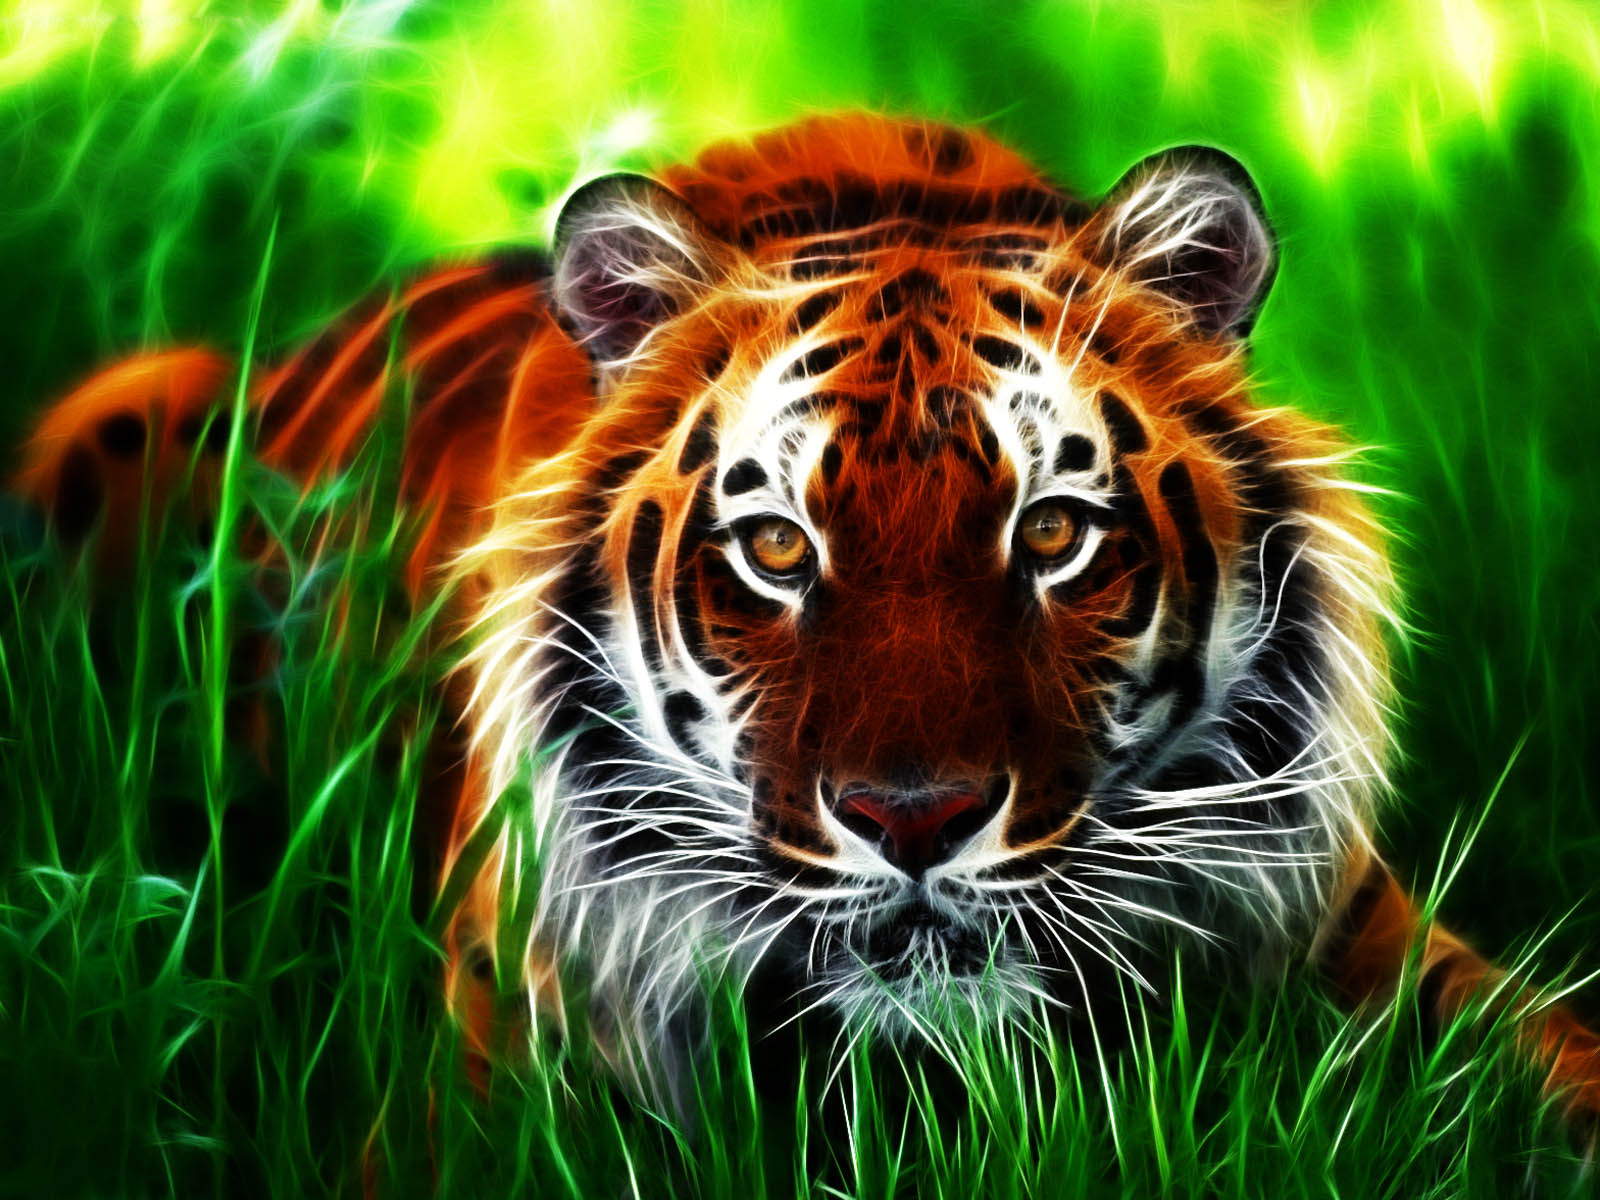 Tag Tiger 3D Wallpapers Images Photos Pictures and Backgrounds for 1600x1200